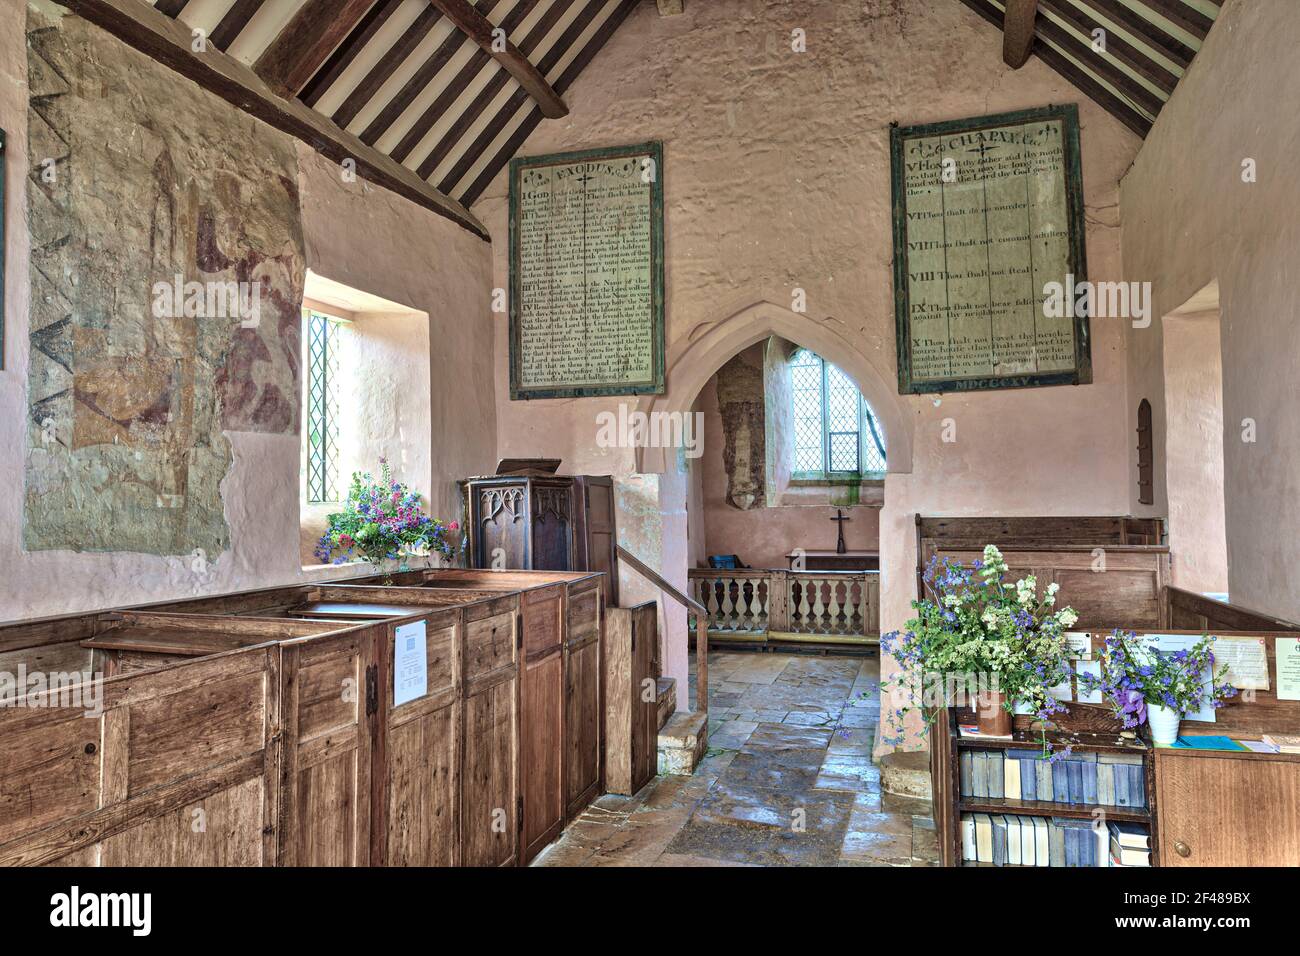 The interior of the 13th century church of St Oswald, now isolated, standing on the edge of a deserted medieval village at Widford, Oxfordshire UK Stock Photo